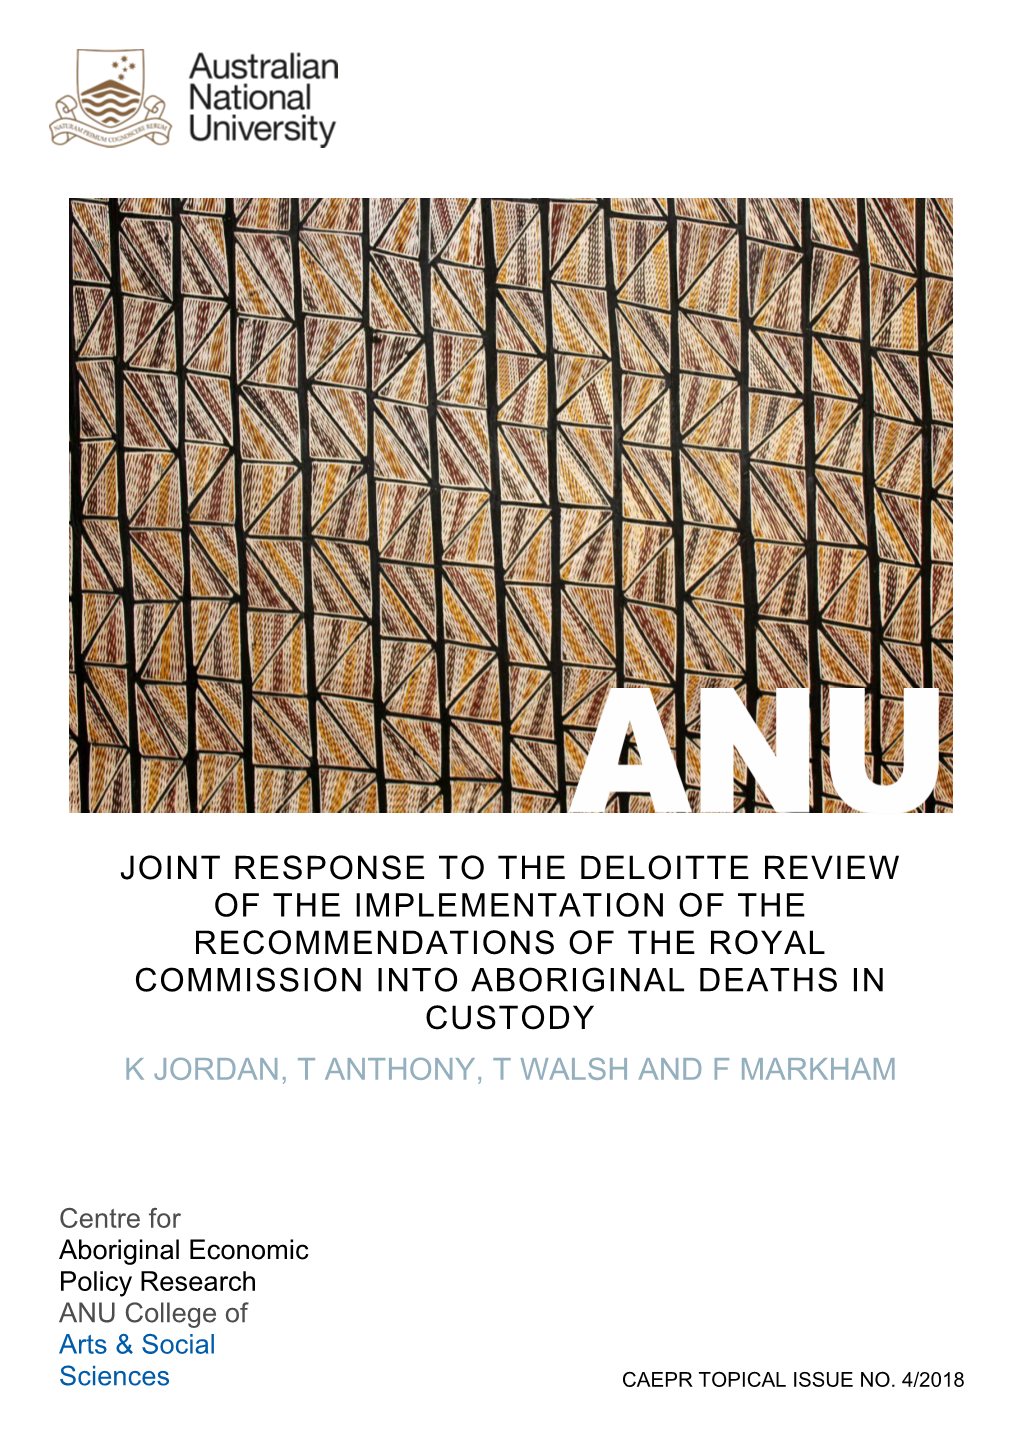 Joint Response to the Deloitte Review of the Implementation of The